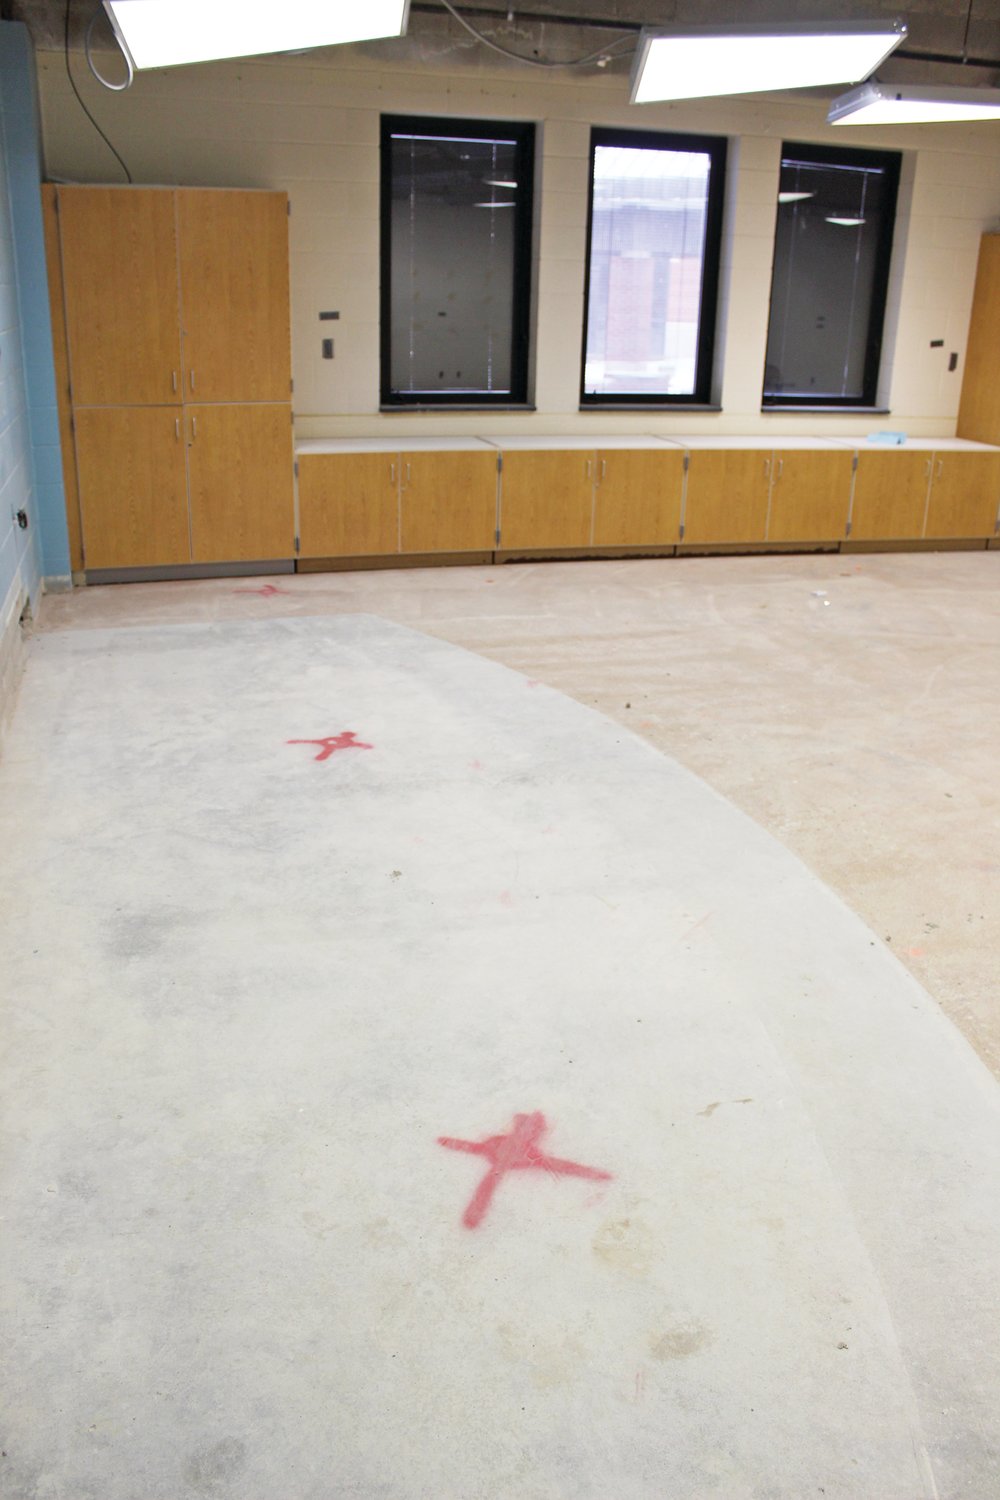 Renovations at Crawfordsville High School include the classroom improvements. The former stage of the drama room has been taken up to make room for such upgrades.